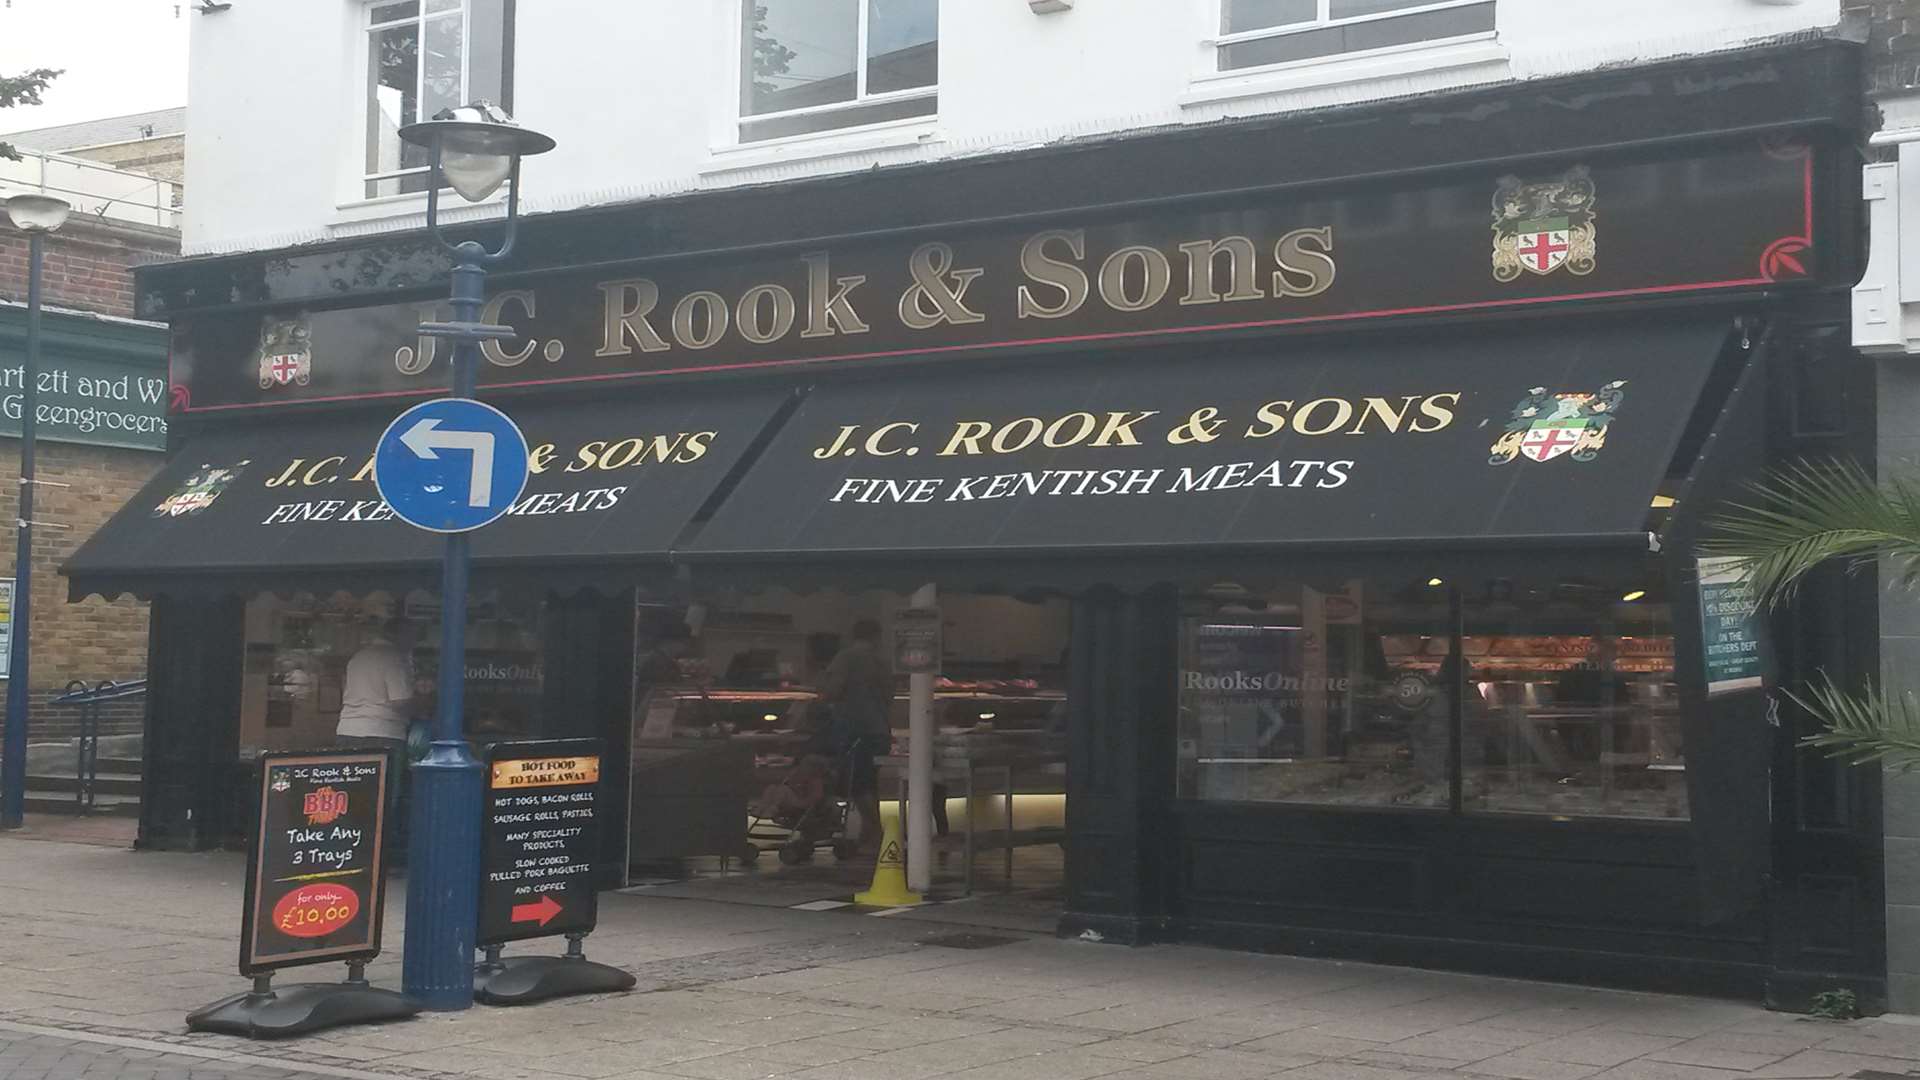 The disabled pensioner was attacked in JC Rook and Sons, King Street.